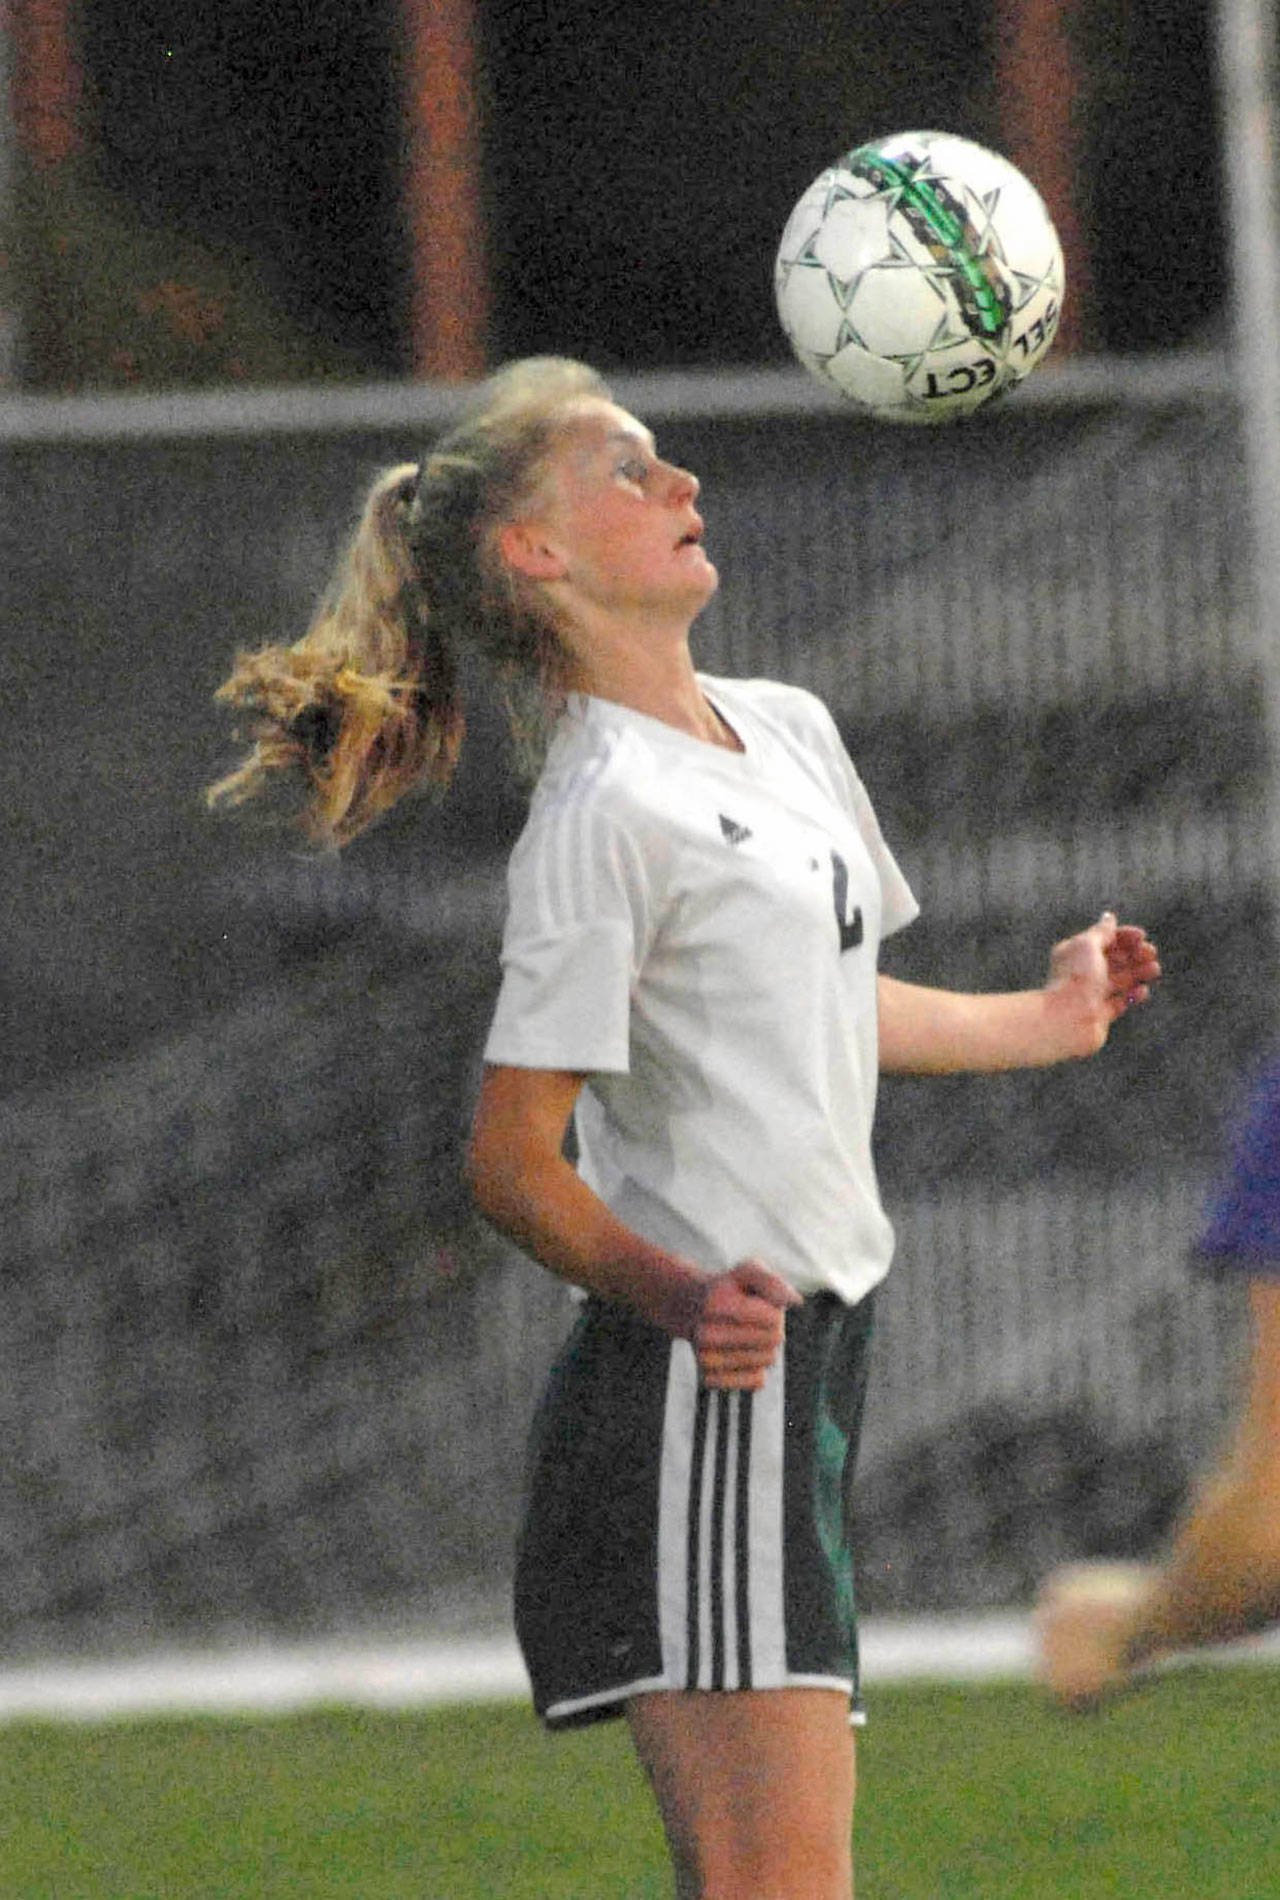 Keith Thorpe/Peninsula Daily News Port Angeles’ Emilia Long led all players in both scoring and assists on the North Olympic Peninsula this season and has been selected the All-Peninsula Girls Soccer MVP.